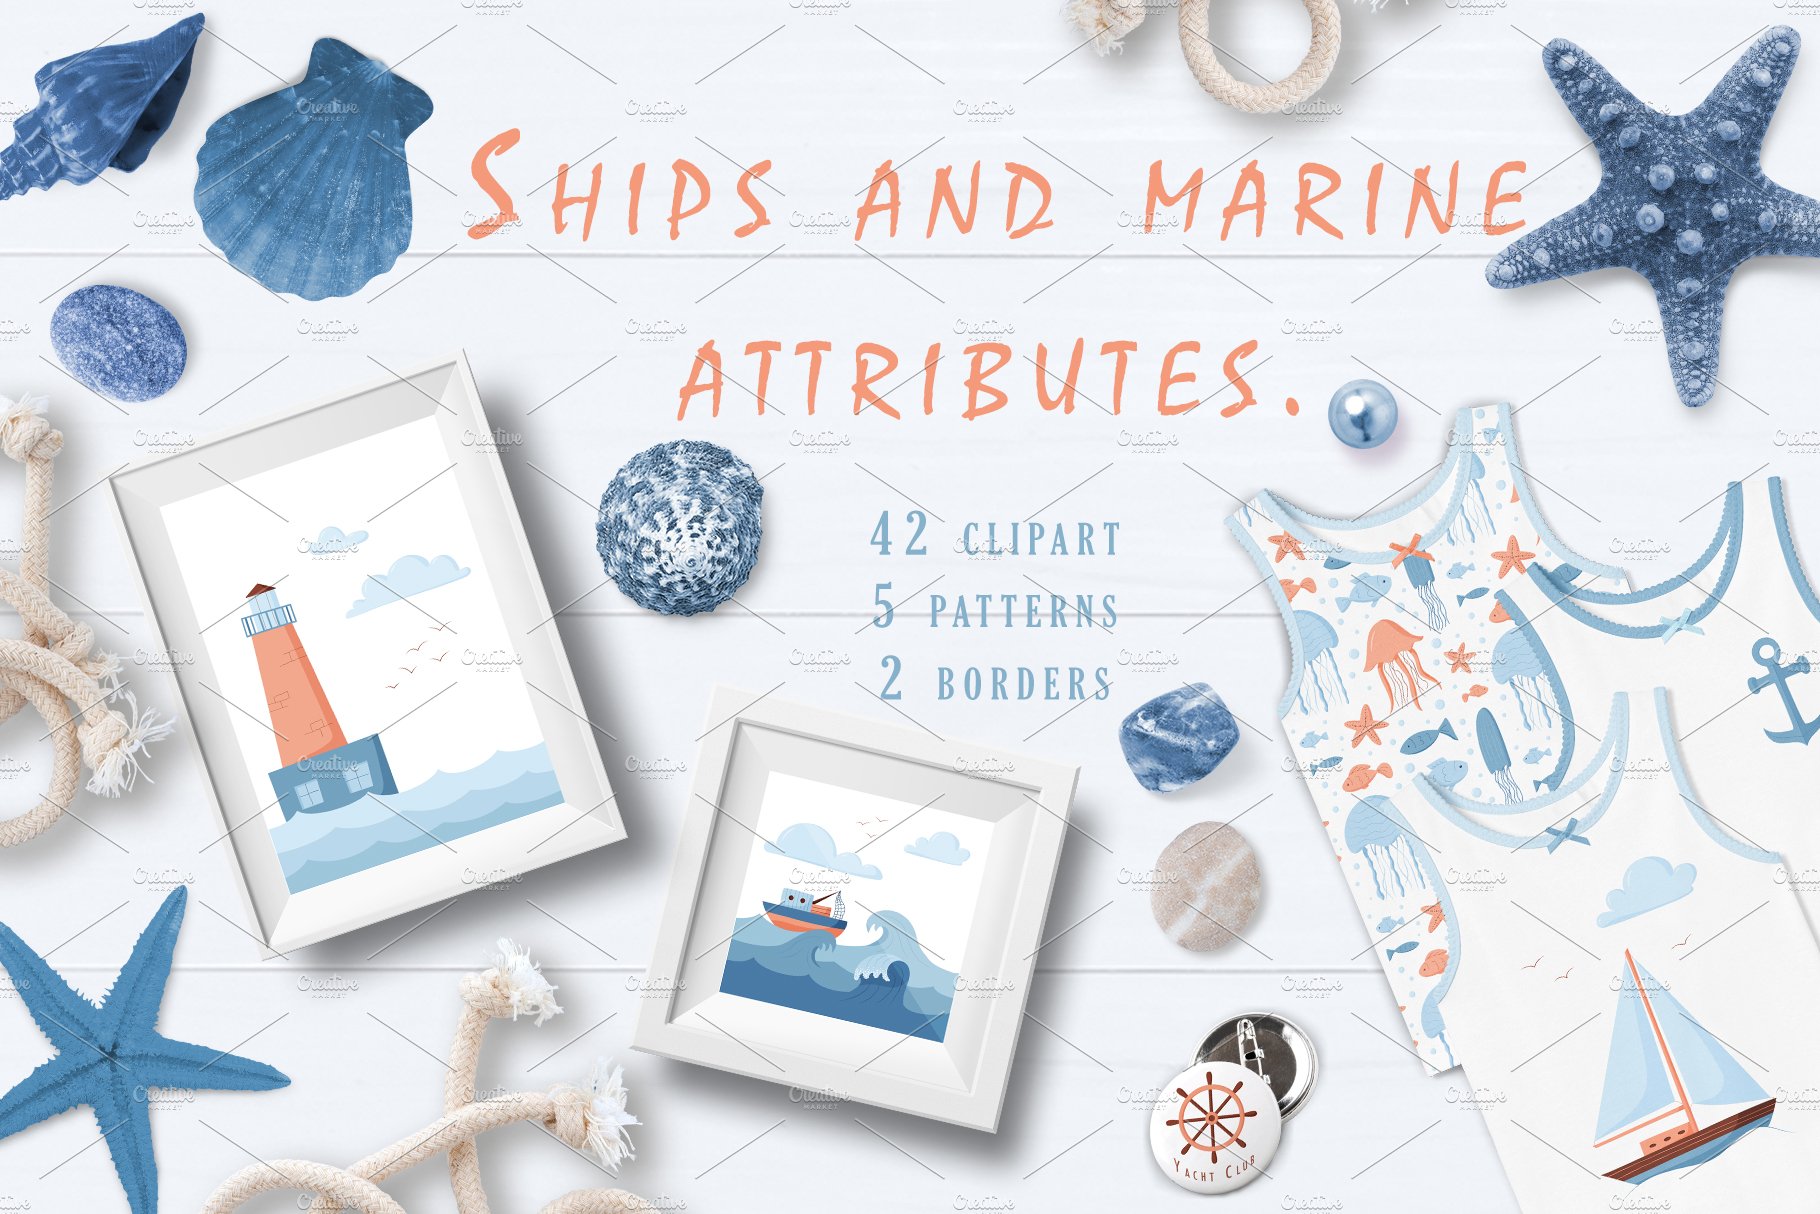 Ships and marine attributes. Vector cover image.